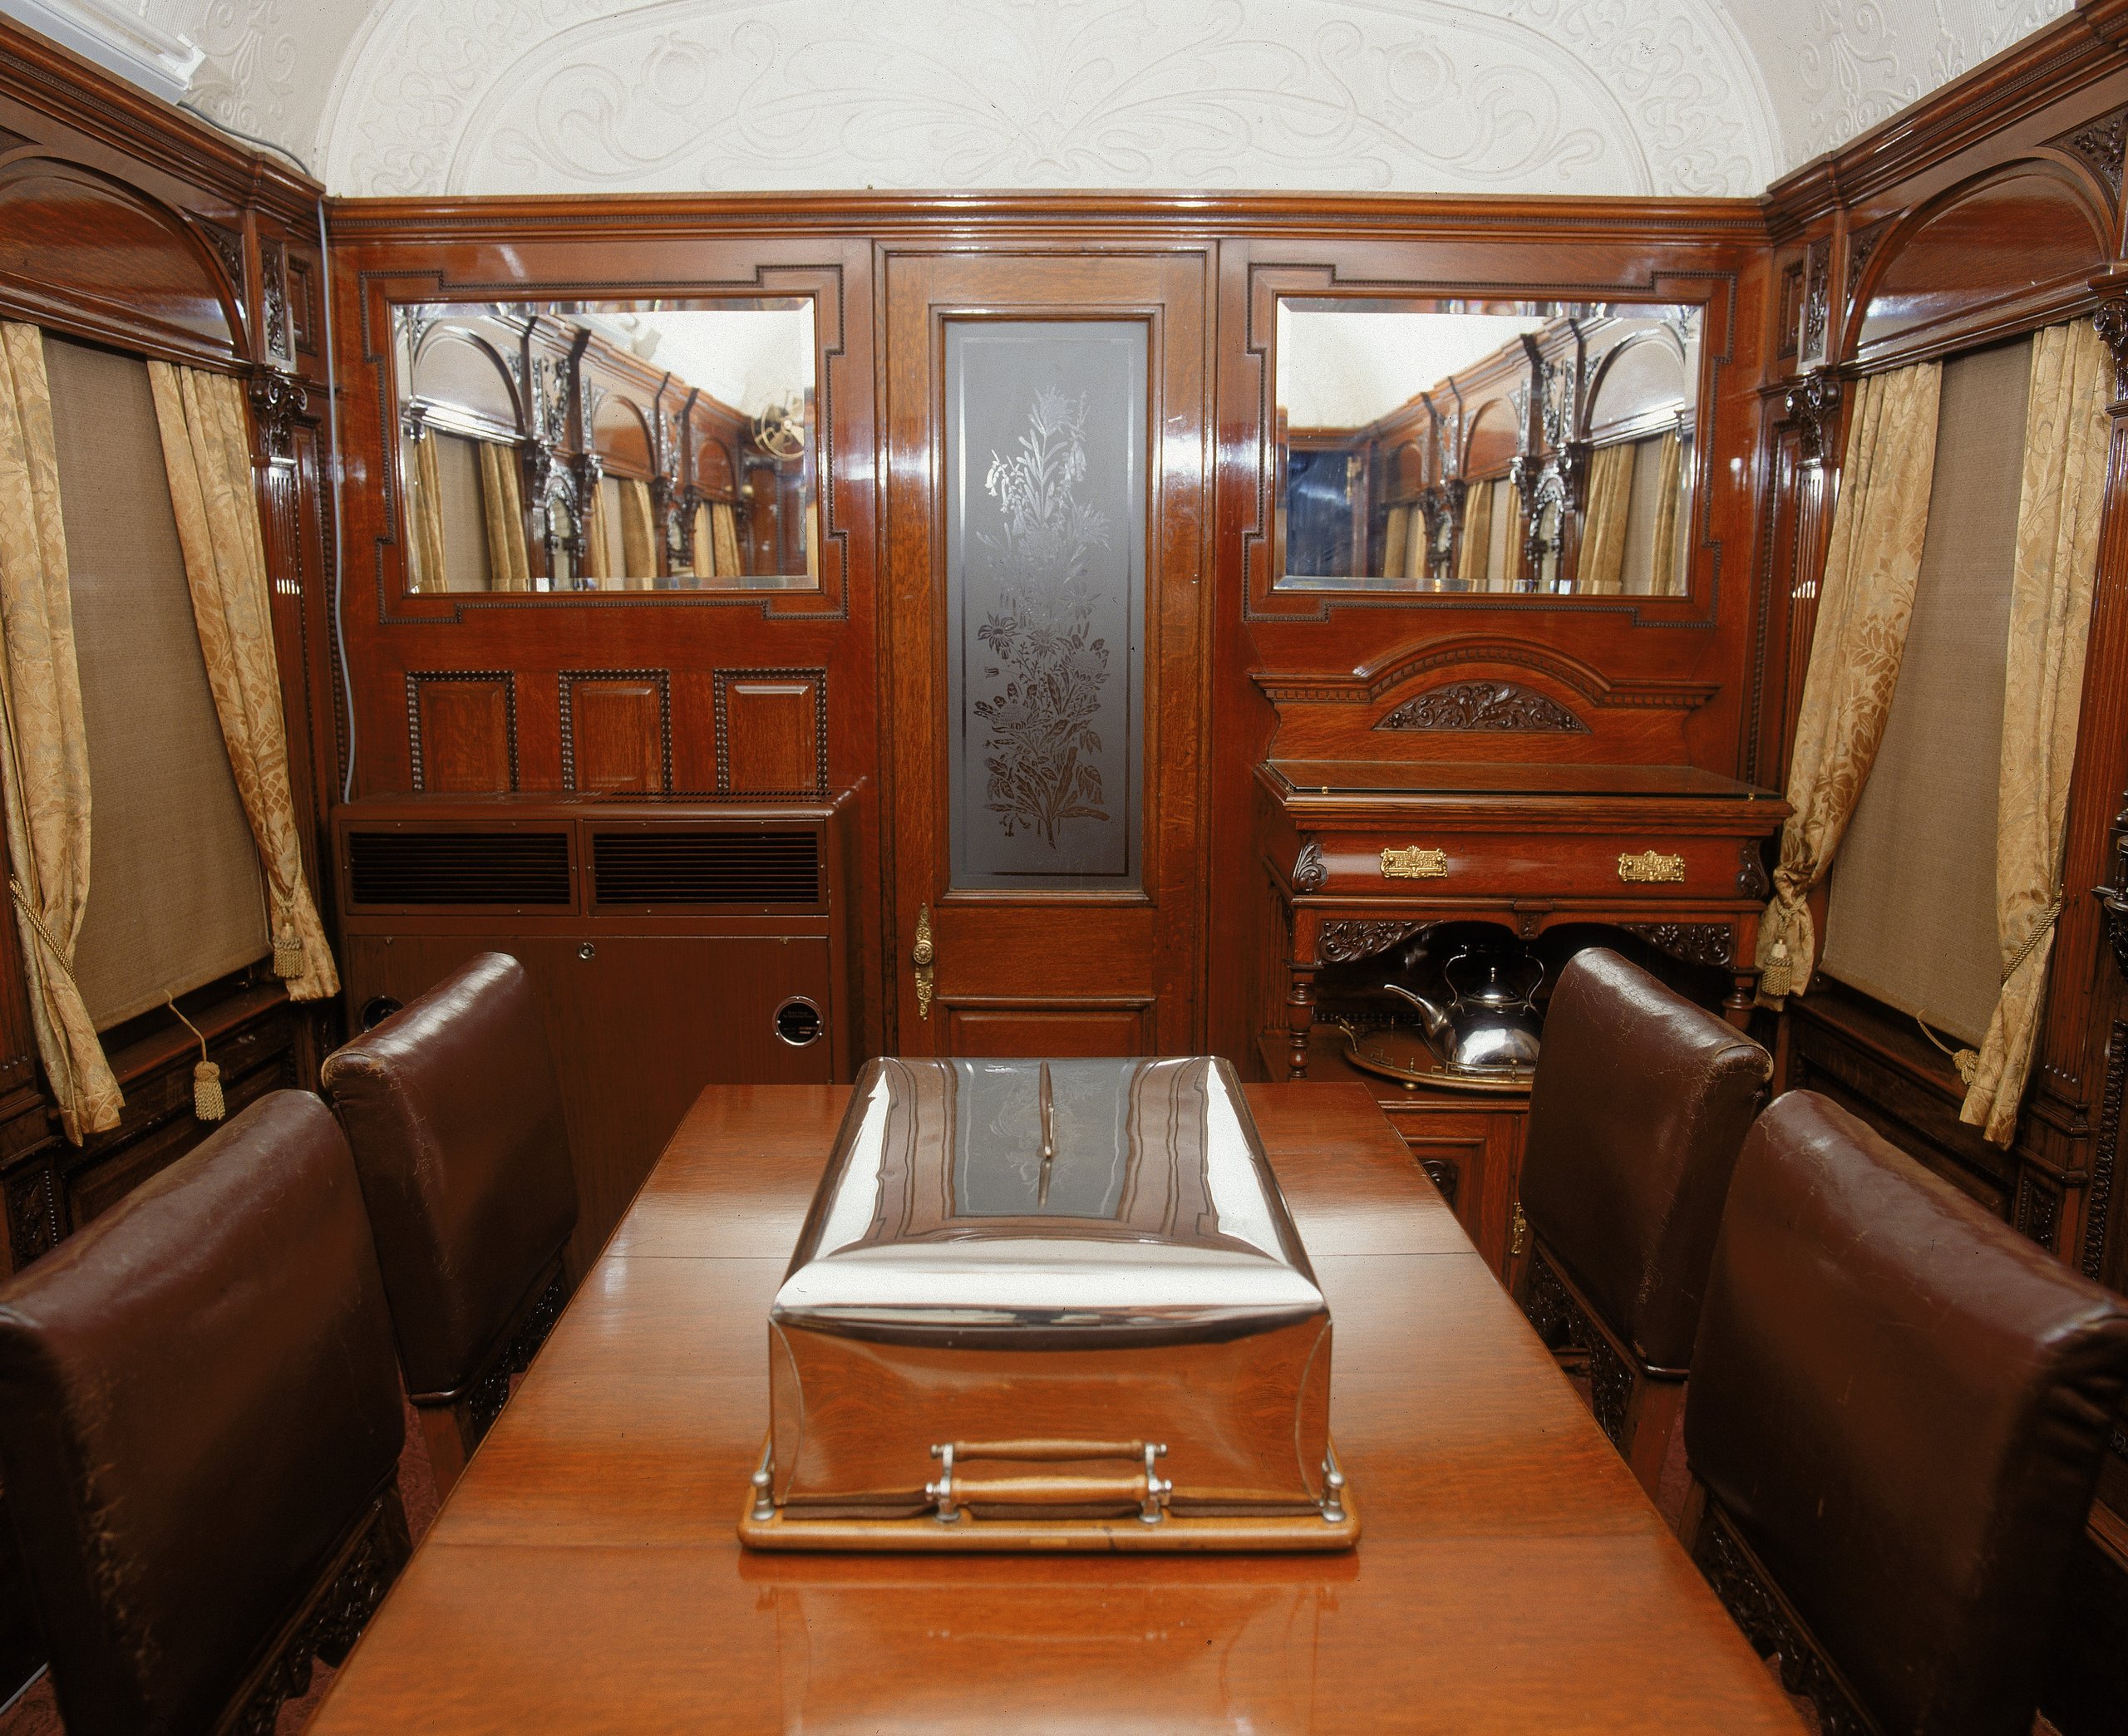 Governor-General's Railway Carriage